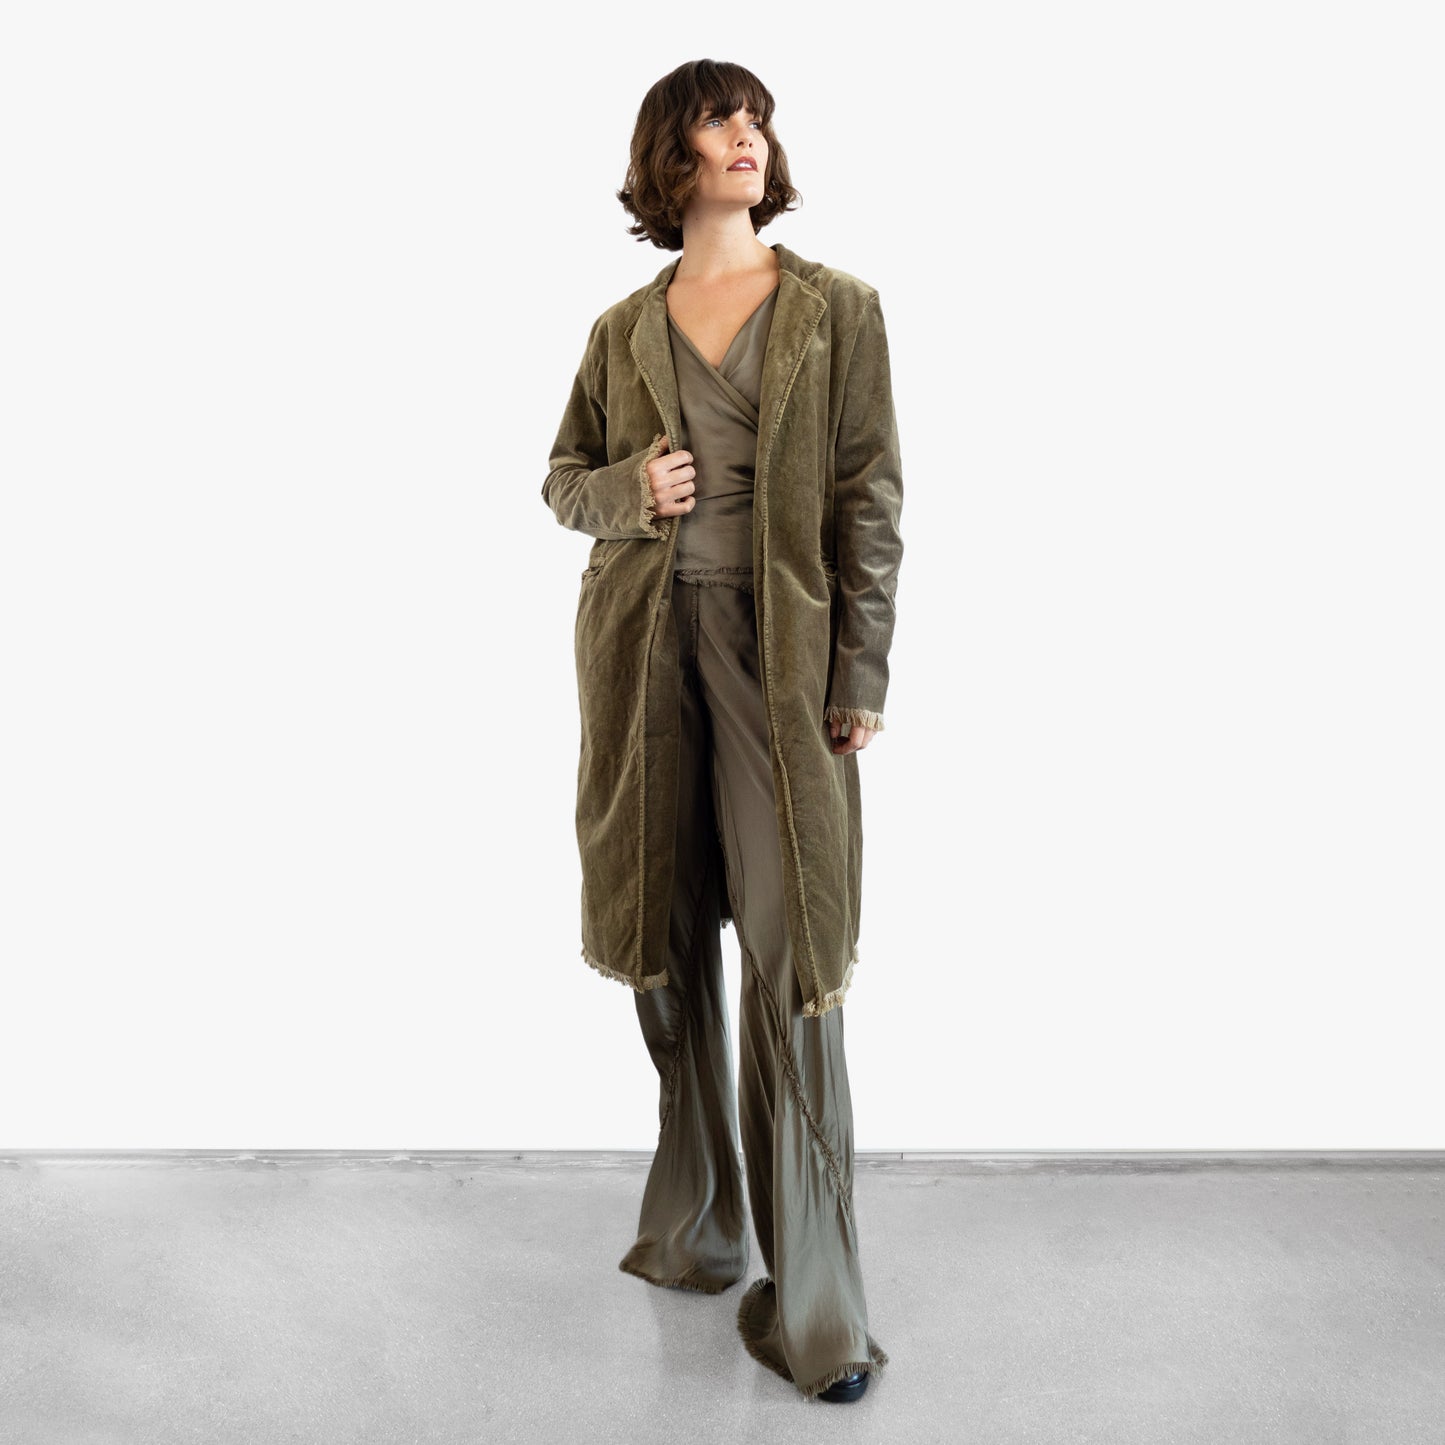 Model wearing a green velvet coat over a green silk wrap top and pants